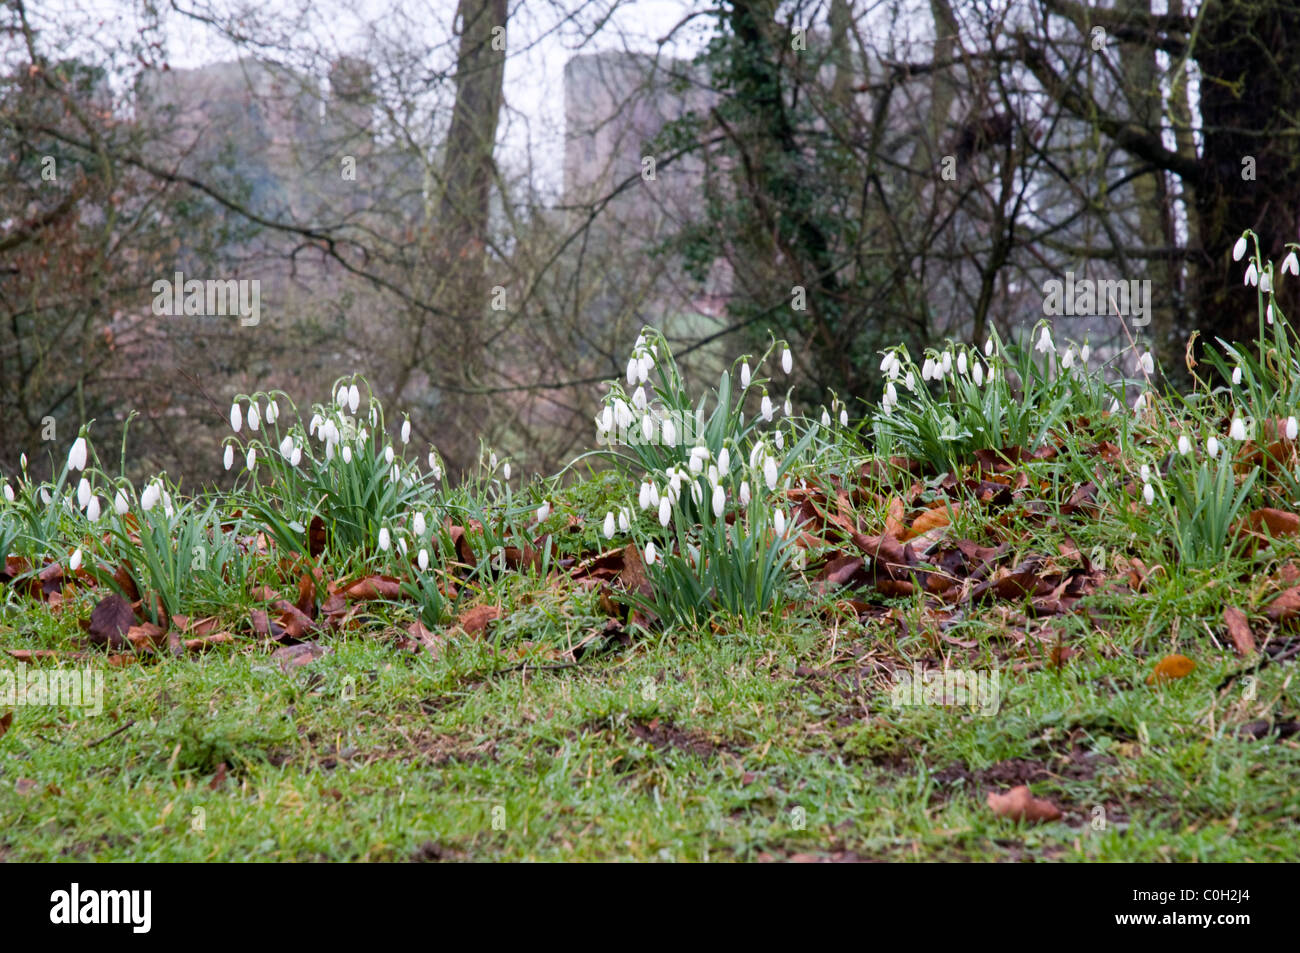 Snowdrops flower on the edge of some woodland with Kenilworth Castle as a backdrop. Stock Photo